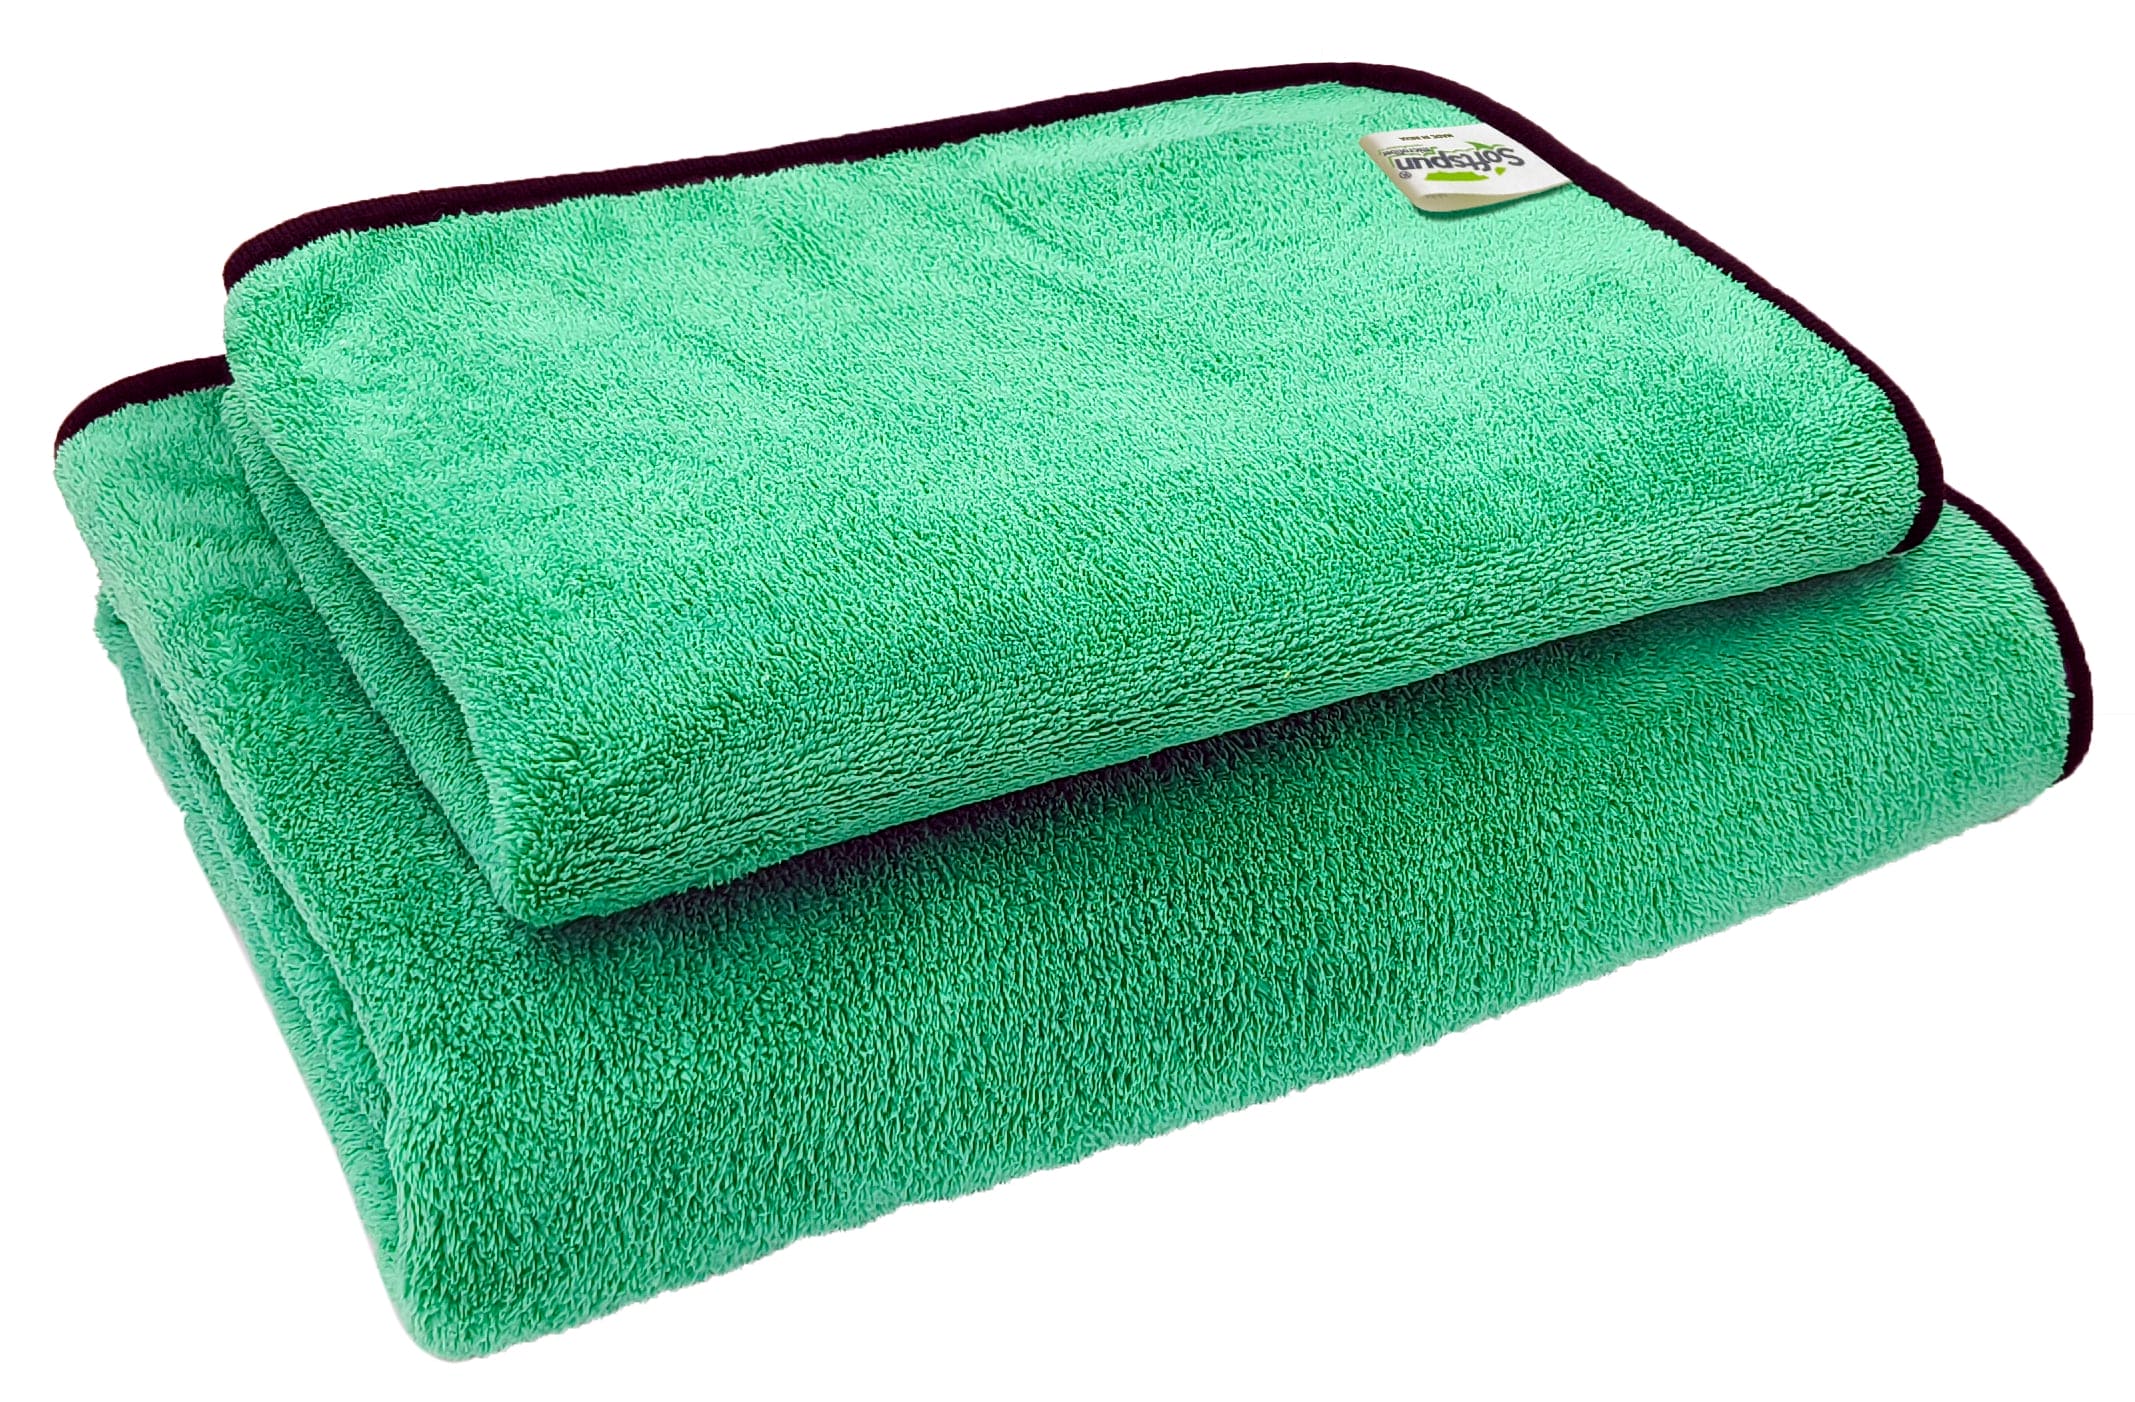 SOFTSPUN Microfiber Bath Towel 2 pc 60x120cm & 40X60cm 280GSM  Ultra Absorbent Super Soft & Comfortable Quick Drying for Men & Women Daily Use Pack of 1 Extra Large Size Unisex.